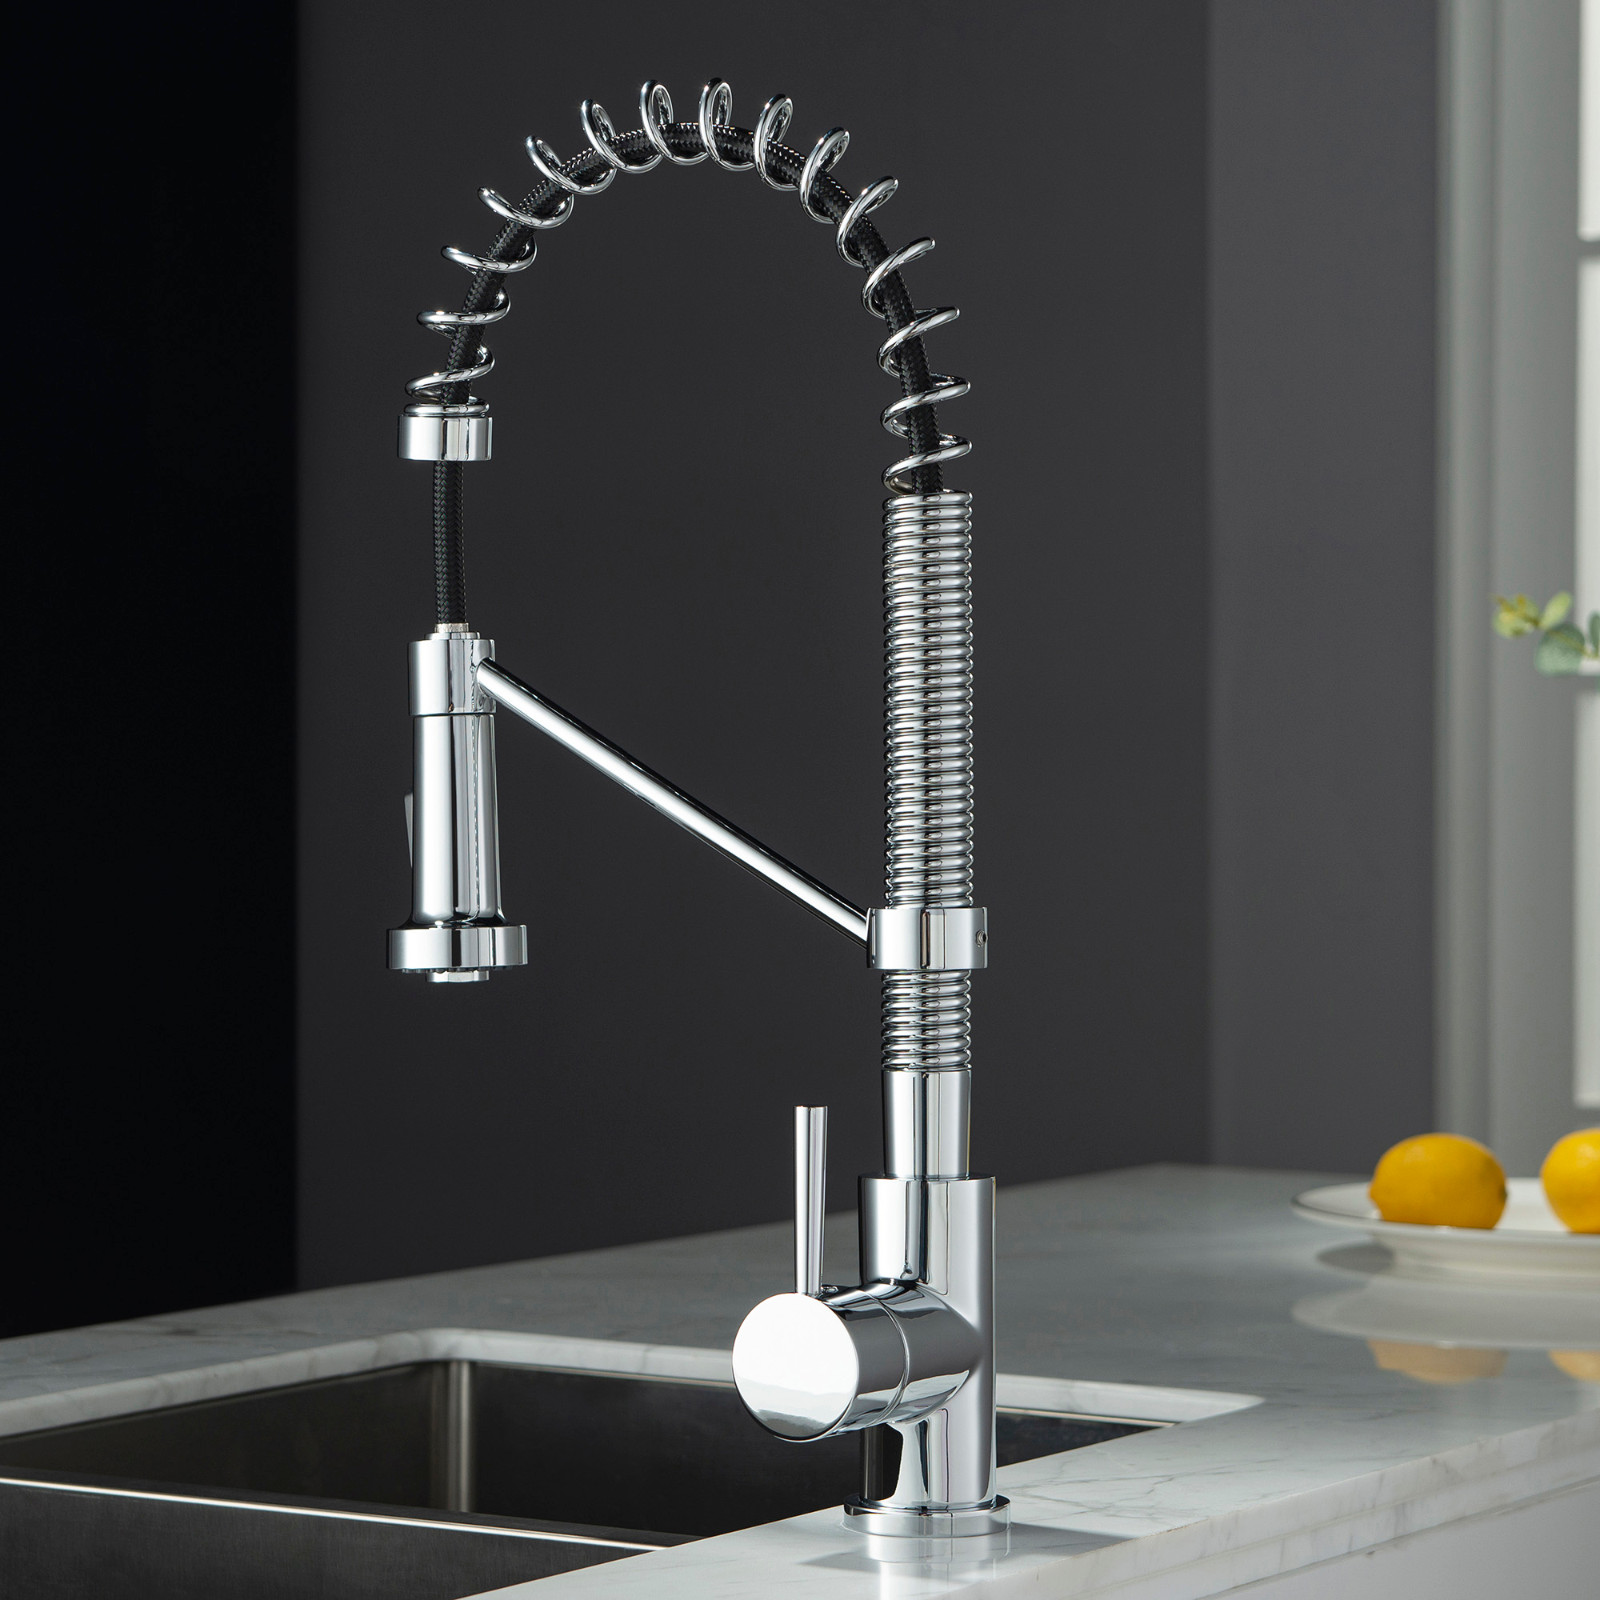  WOODBRIDGE WK010203CH Stainless Steel Single Handle Spring Coil Pre-Rinse Kitchen Faucet with Pull Down Sprayer, Chrome Finish_9454